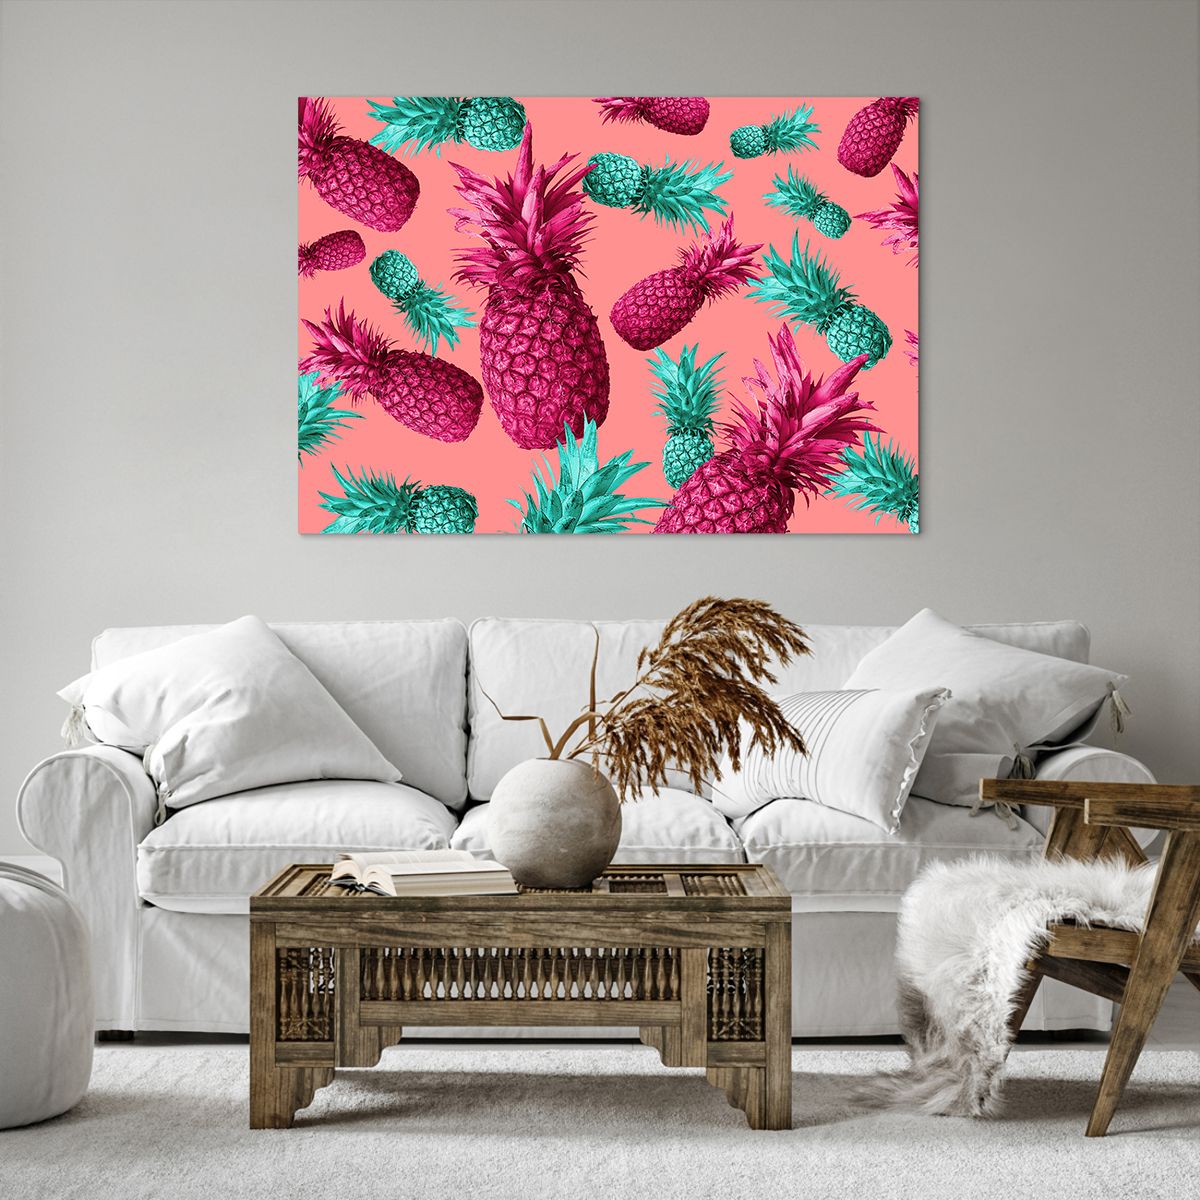 Impression sur toile Abstraction, Impression sur toile Ananas, Impression sur toile Art, Impression sur toile Fruit, Impression sur toile Cuisine